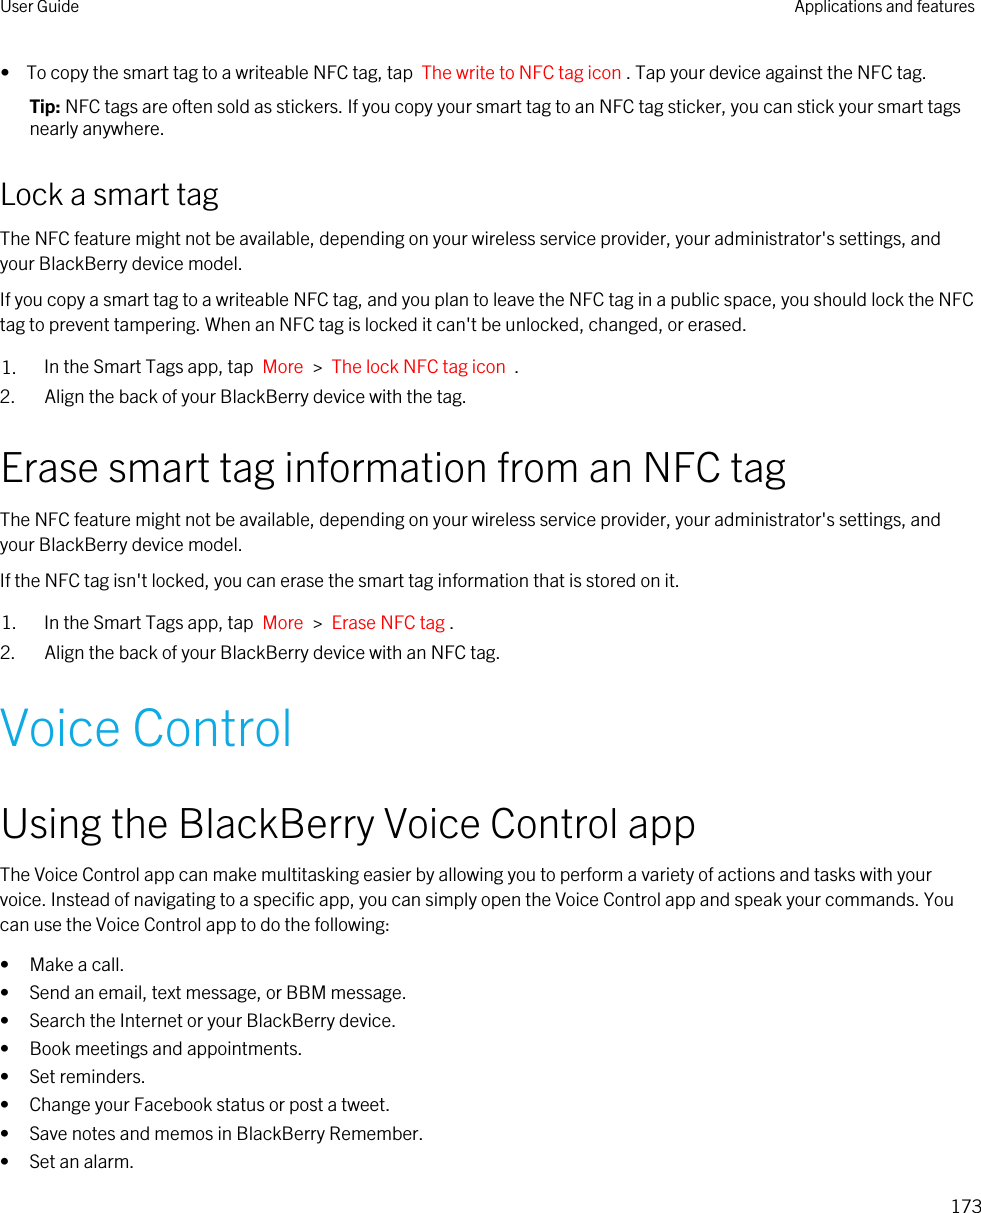 •  To copy the smart tag to a writeable NFC tag, tap  The write to NFC tag icon . Tap your device against the NFC tag.Tip: NFC tags are often sold as stickers. If you copy your smart tag to an NFC tag sticker, you can stick your smart tags nearly anywhere.Lock a smart tagThe NFC feature might not be available, depending on your wireless service provider, your administrator&apos;s settings, and your BlackBerry device model.If you copy a smart tag to a writeable NFC tag, and you plan to leave the NFC tag in a public space, you should lock the NFC tag to prevent tampering. When an NFC tag is locked it can&apos;t be unlocked, changed, or erased.1. In the Smart Tags app, tap  More  &gt;  The lock NFC tag icon  .2. Align the back of your BlackBerry device with the tag.Erase smart tag information from an NFC tagThe NFC feature might not be available, depending on your wireless service provider, your administrator&apos;s settings, and your BlackBerry device model.If the NFC tag isn&apos;t locked, you can erase the smart tag information that is stored on it.1. In the Smart Tags app, tap  More  &gt;  Erase NFC tag .2. Align the back of your BlackBerry device with an NFC tag.Voice ControlUsing the BlackBerry Voice Control appThe Voice Control app can make multitasking easier by allowing you to perform a variety of actions and tasks with your voice. Instead of navigating to a specific app, you can simply open the Voice Control app and speak your commands. You can use the Voice Control app to do the following:• Make a call.• Send an email, text message, or BBM message.• Search the Internet or your BlackBerry device.• Book meetings and appointments.• Set reminders.• Change your Facebook status or post a tweet.• Save notes and memos in BlackBerry Remember.• Set an alarm.User Guide Applications and features173